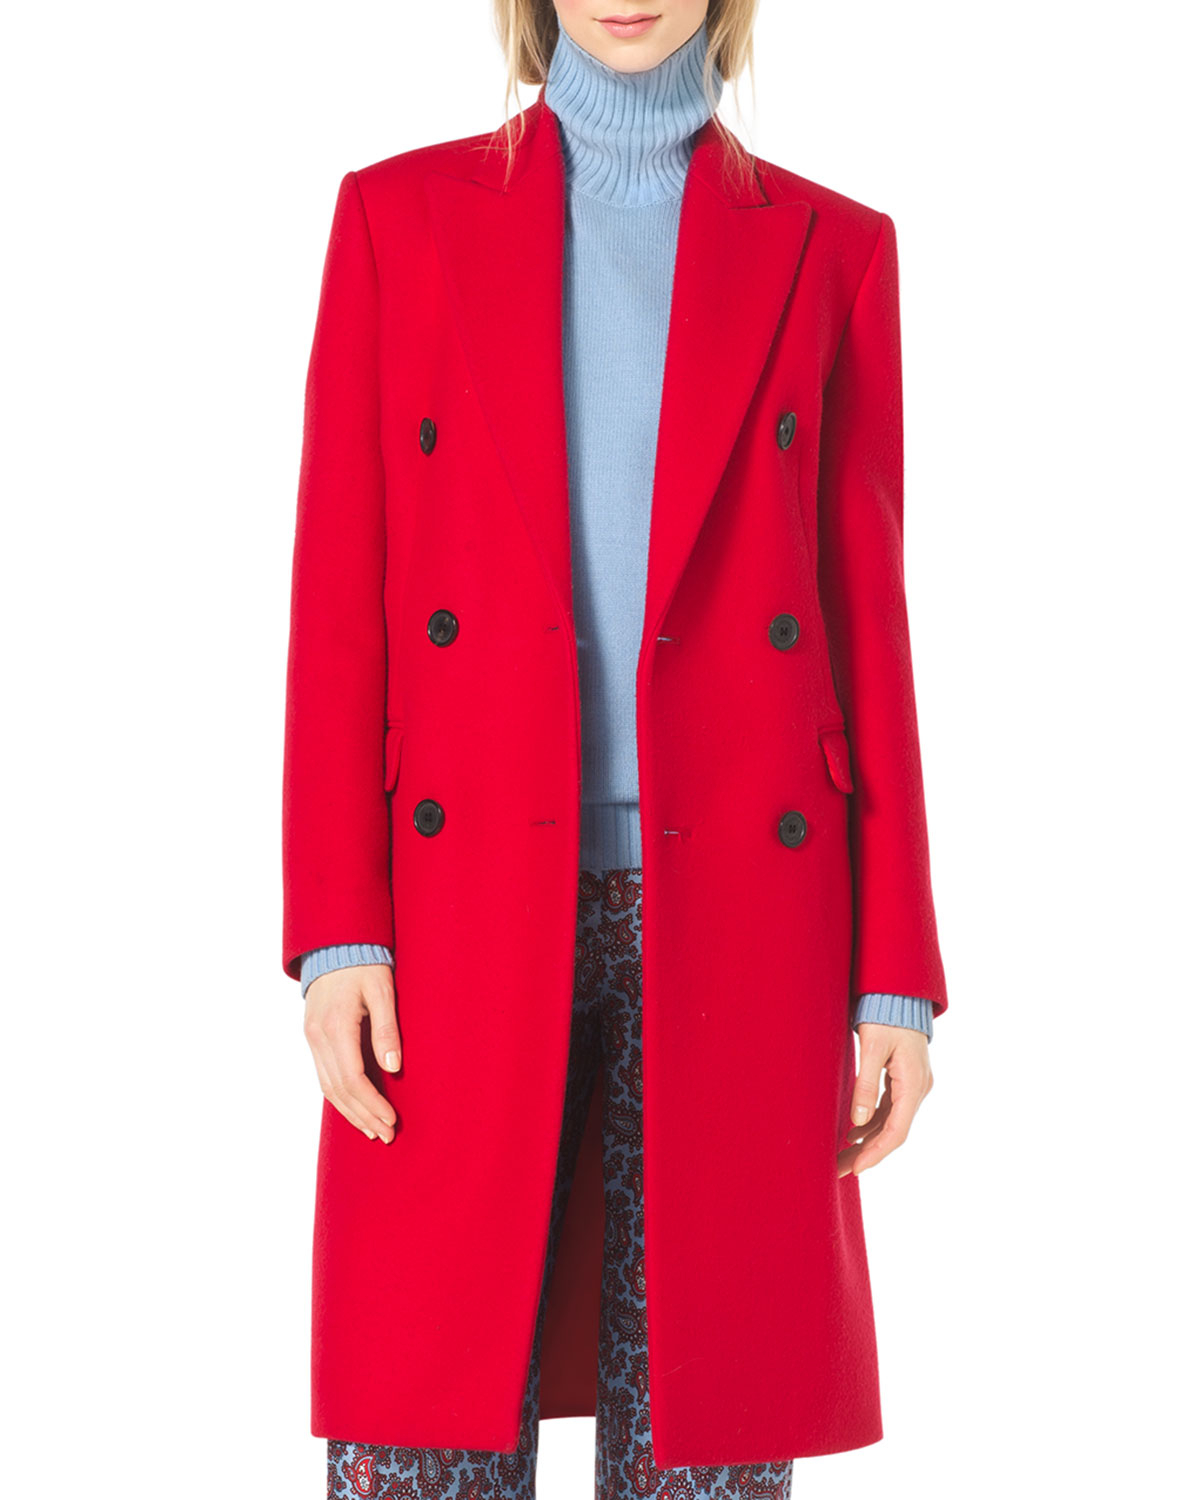 Michael kors Double-breasted Wool Coat in Red (SCARLET) | Lyst